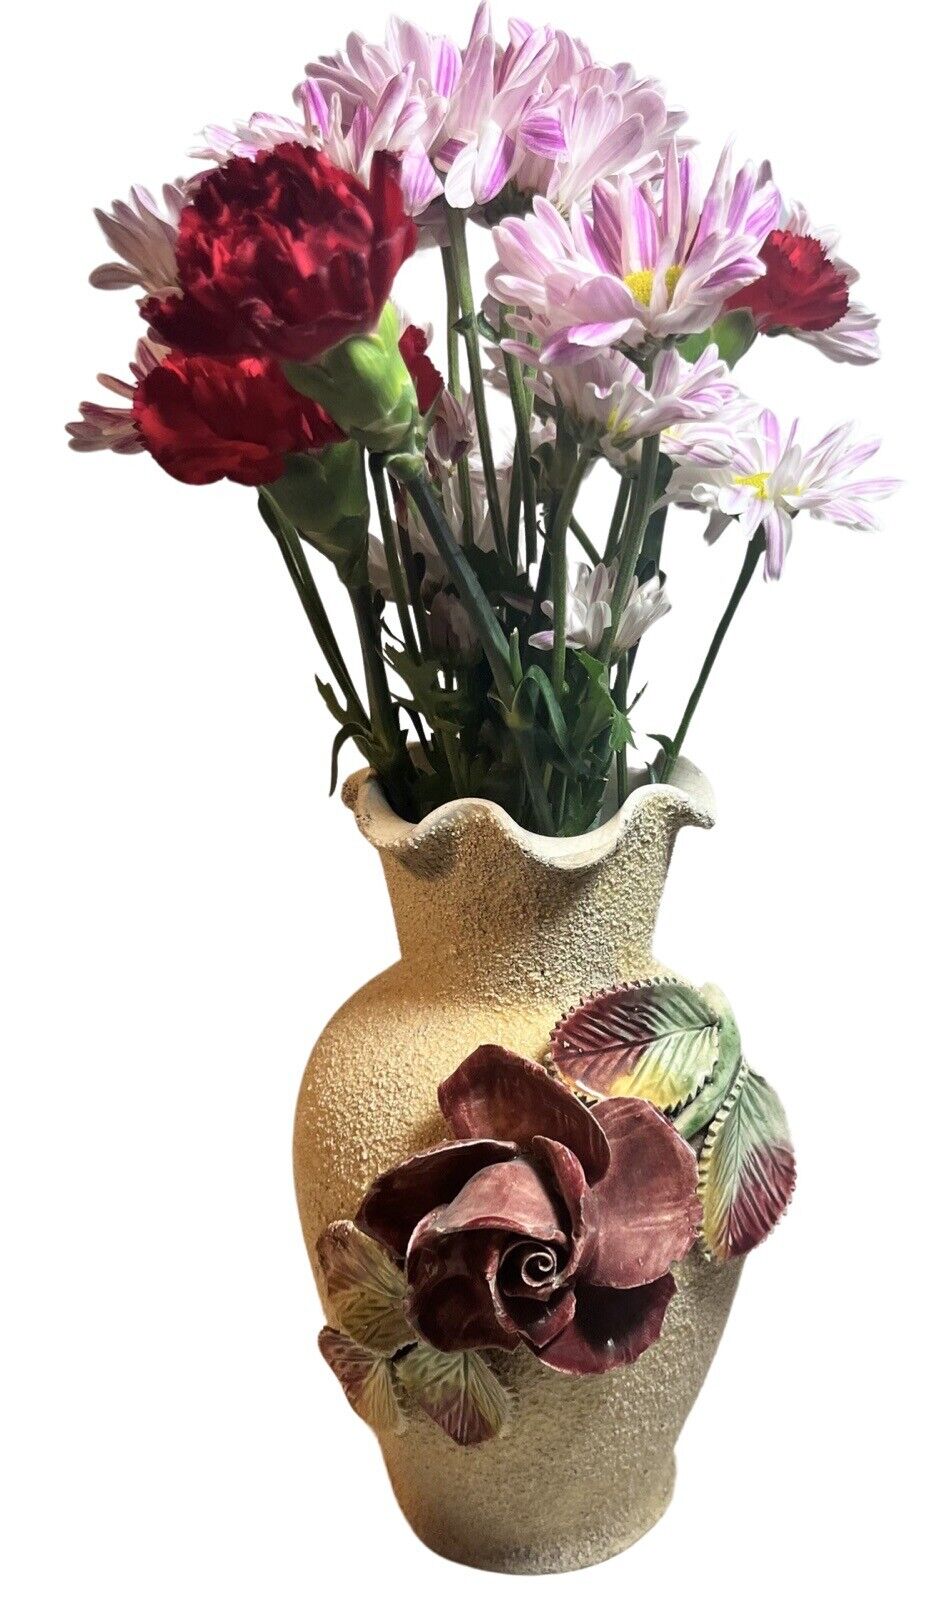 Antique Textured Painted Vase. 3D Effect. Beautiful Rose. Near Mint Condition